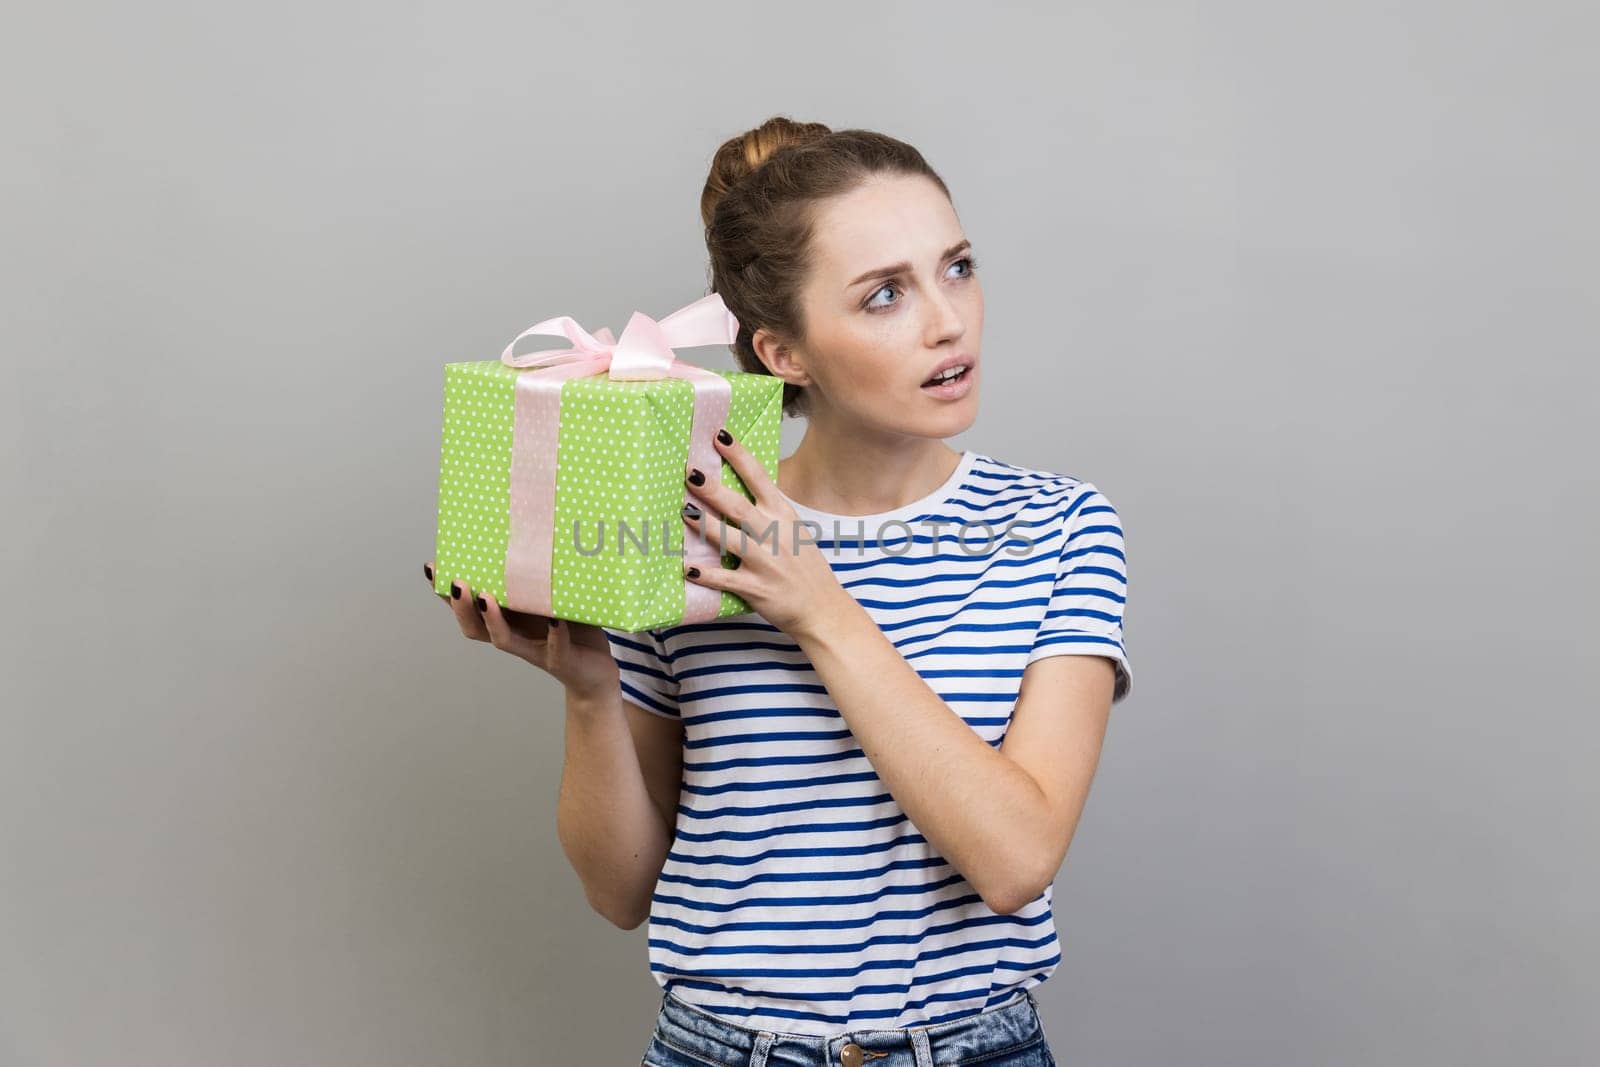 Portrait of woman wearing striped T-shirt shaking wrapped present box, being interested what inside, looking away with curious facial expression. Indoor studio shot isolated on gray background.